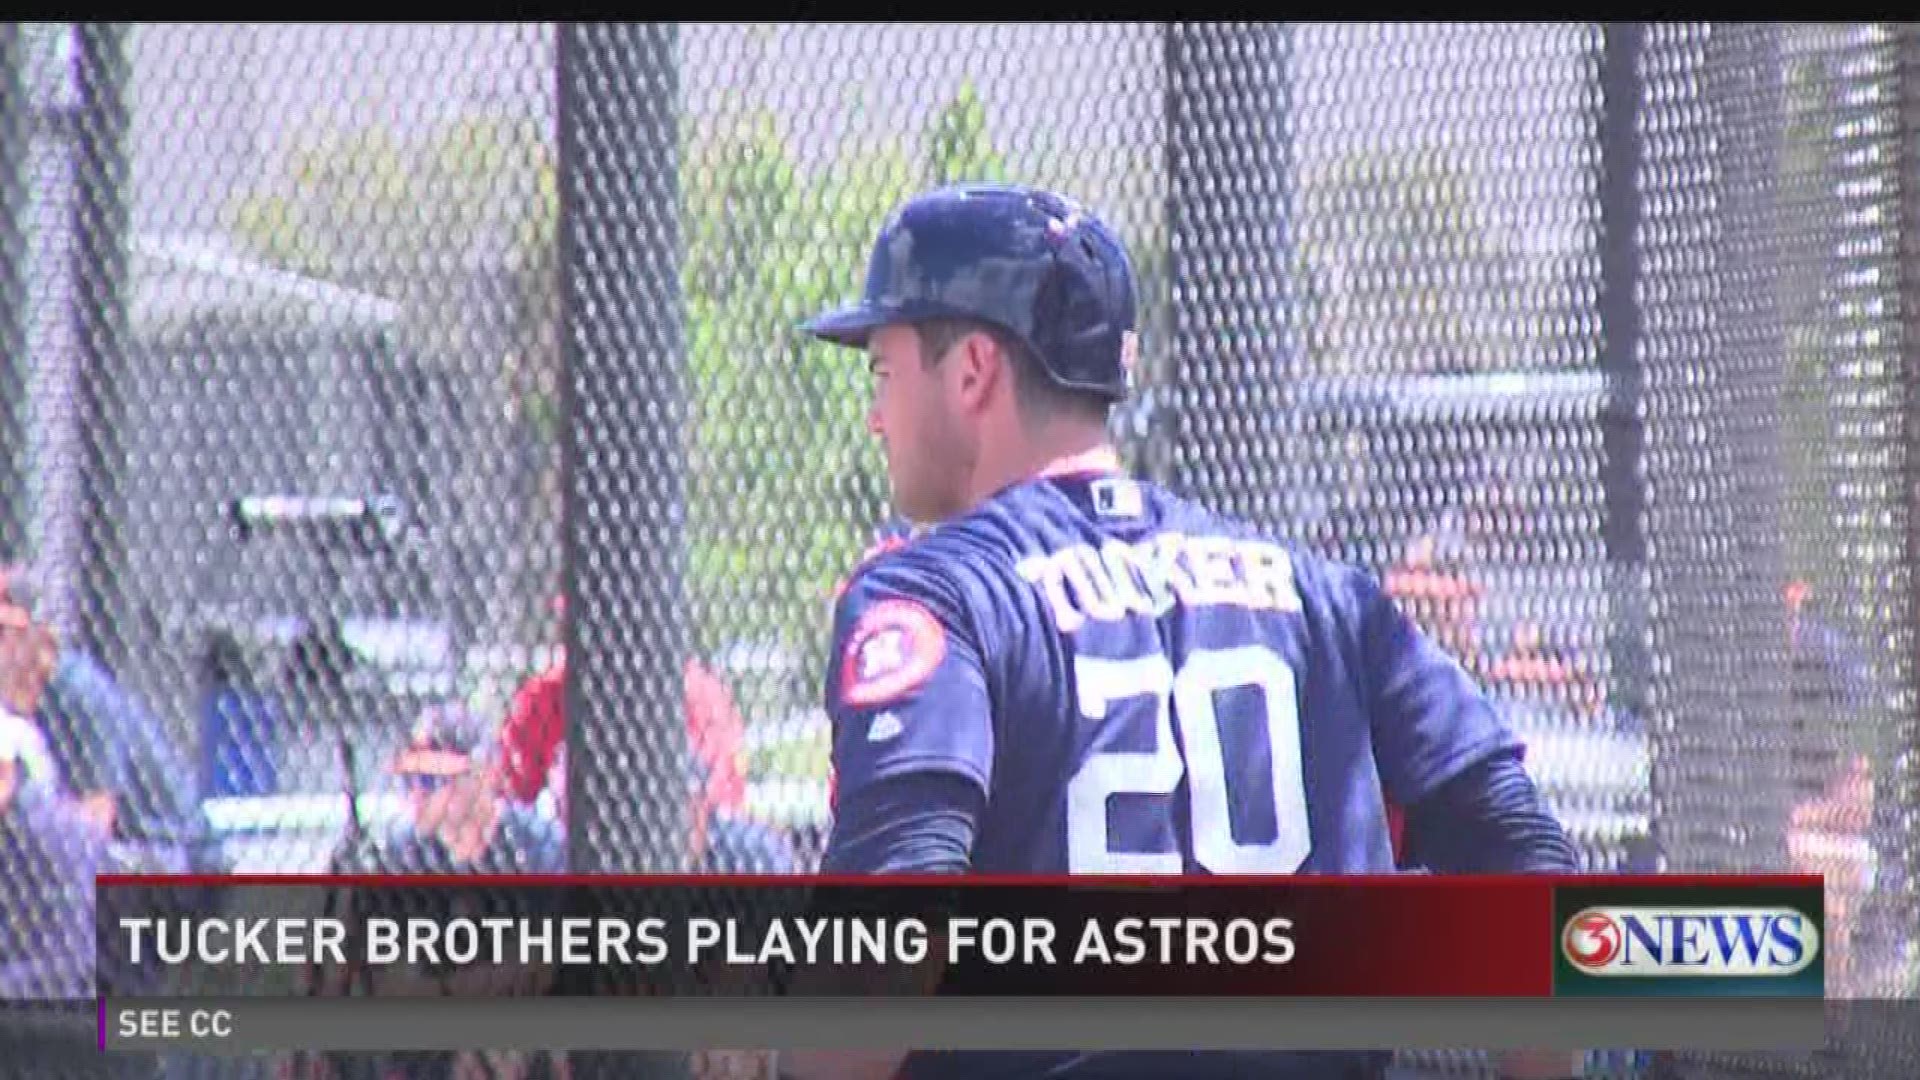 Astros Report: Tucker Brothers Looking to Make an Impact